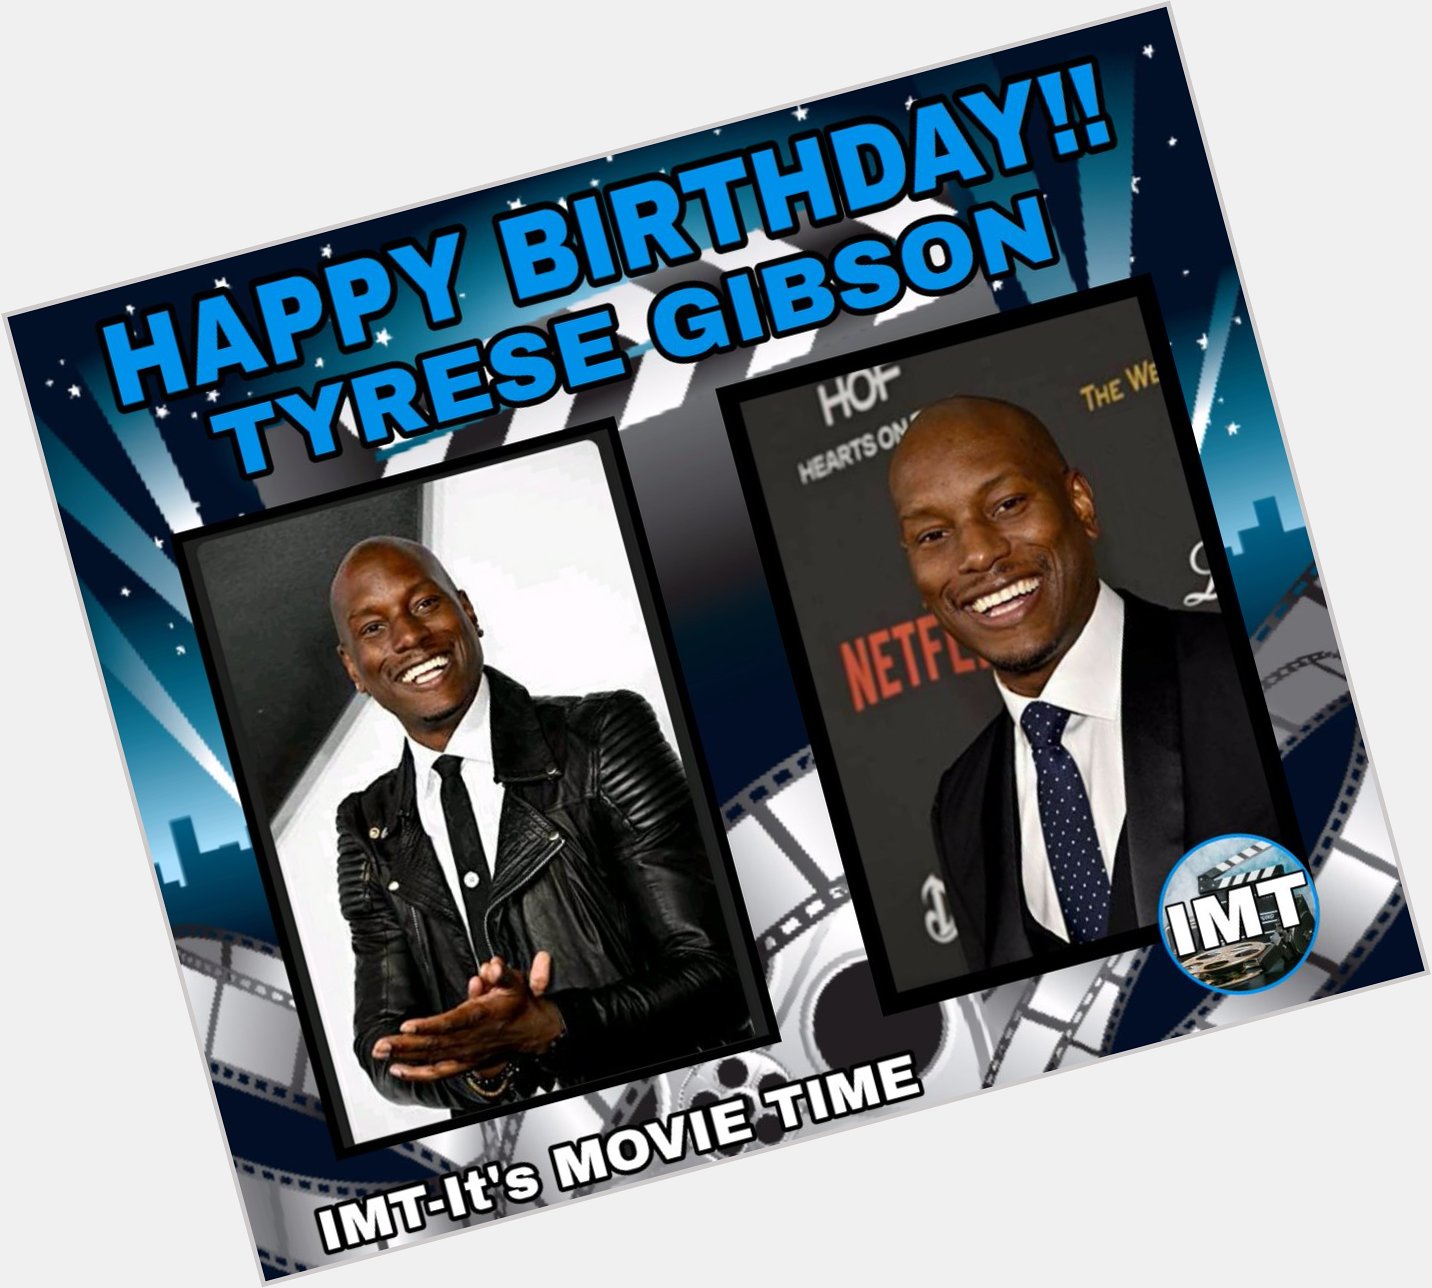 Happy Birthday to Tyrese Gibson! The actor is celebrating 41 years. 